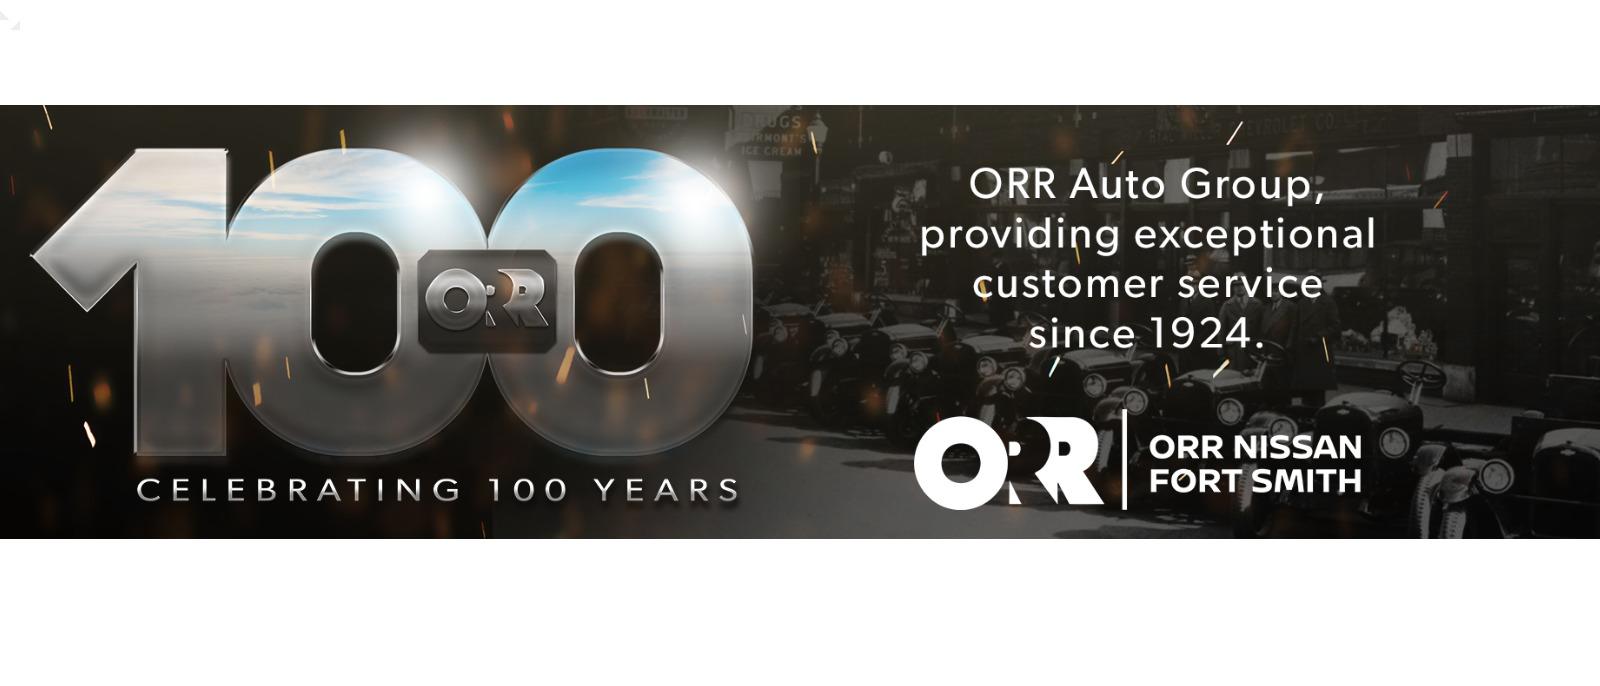 ORR Auto Group providing exceptional customer service since 1924.